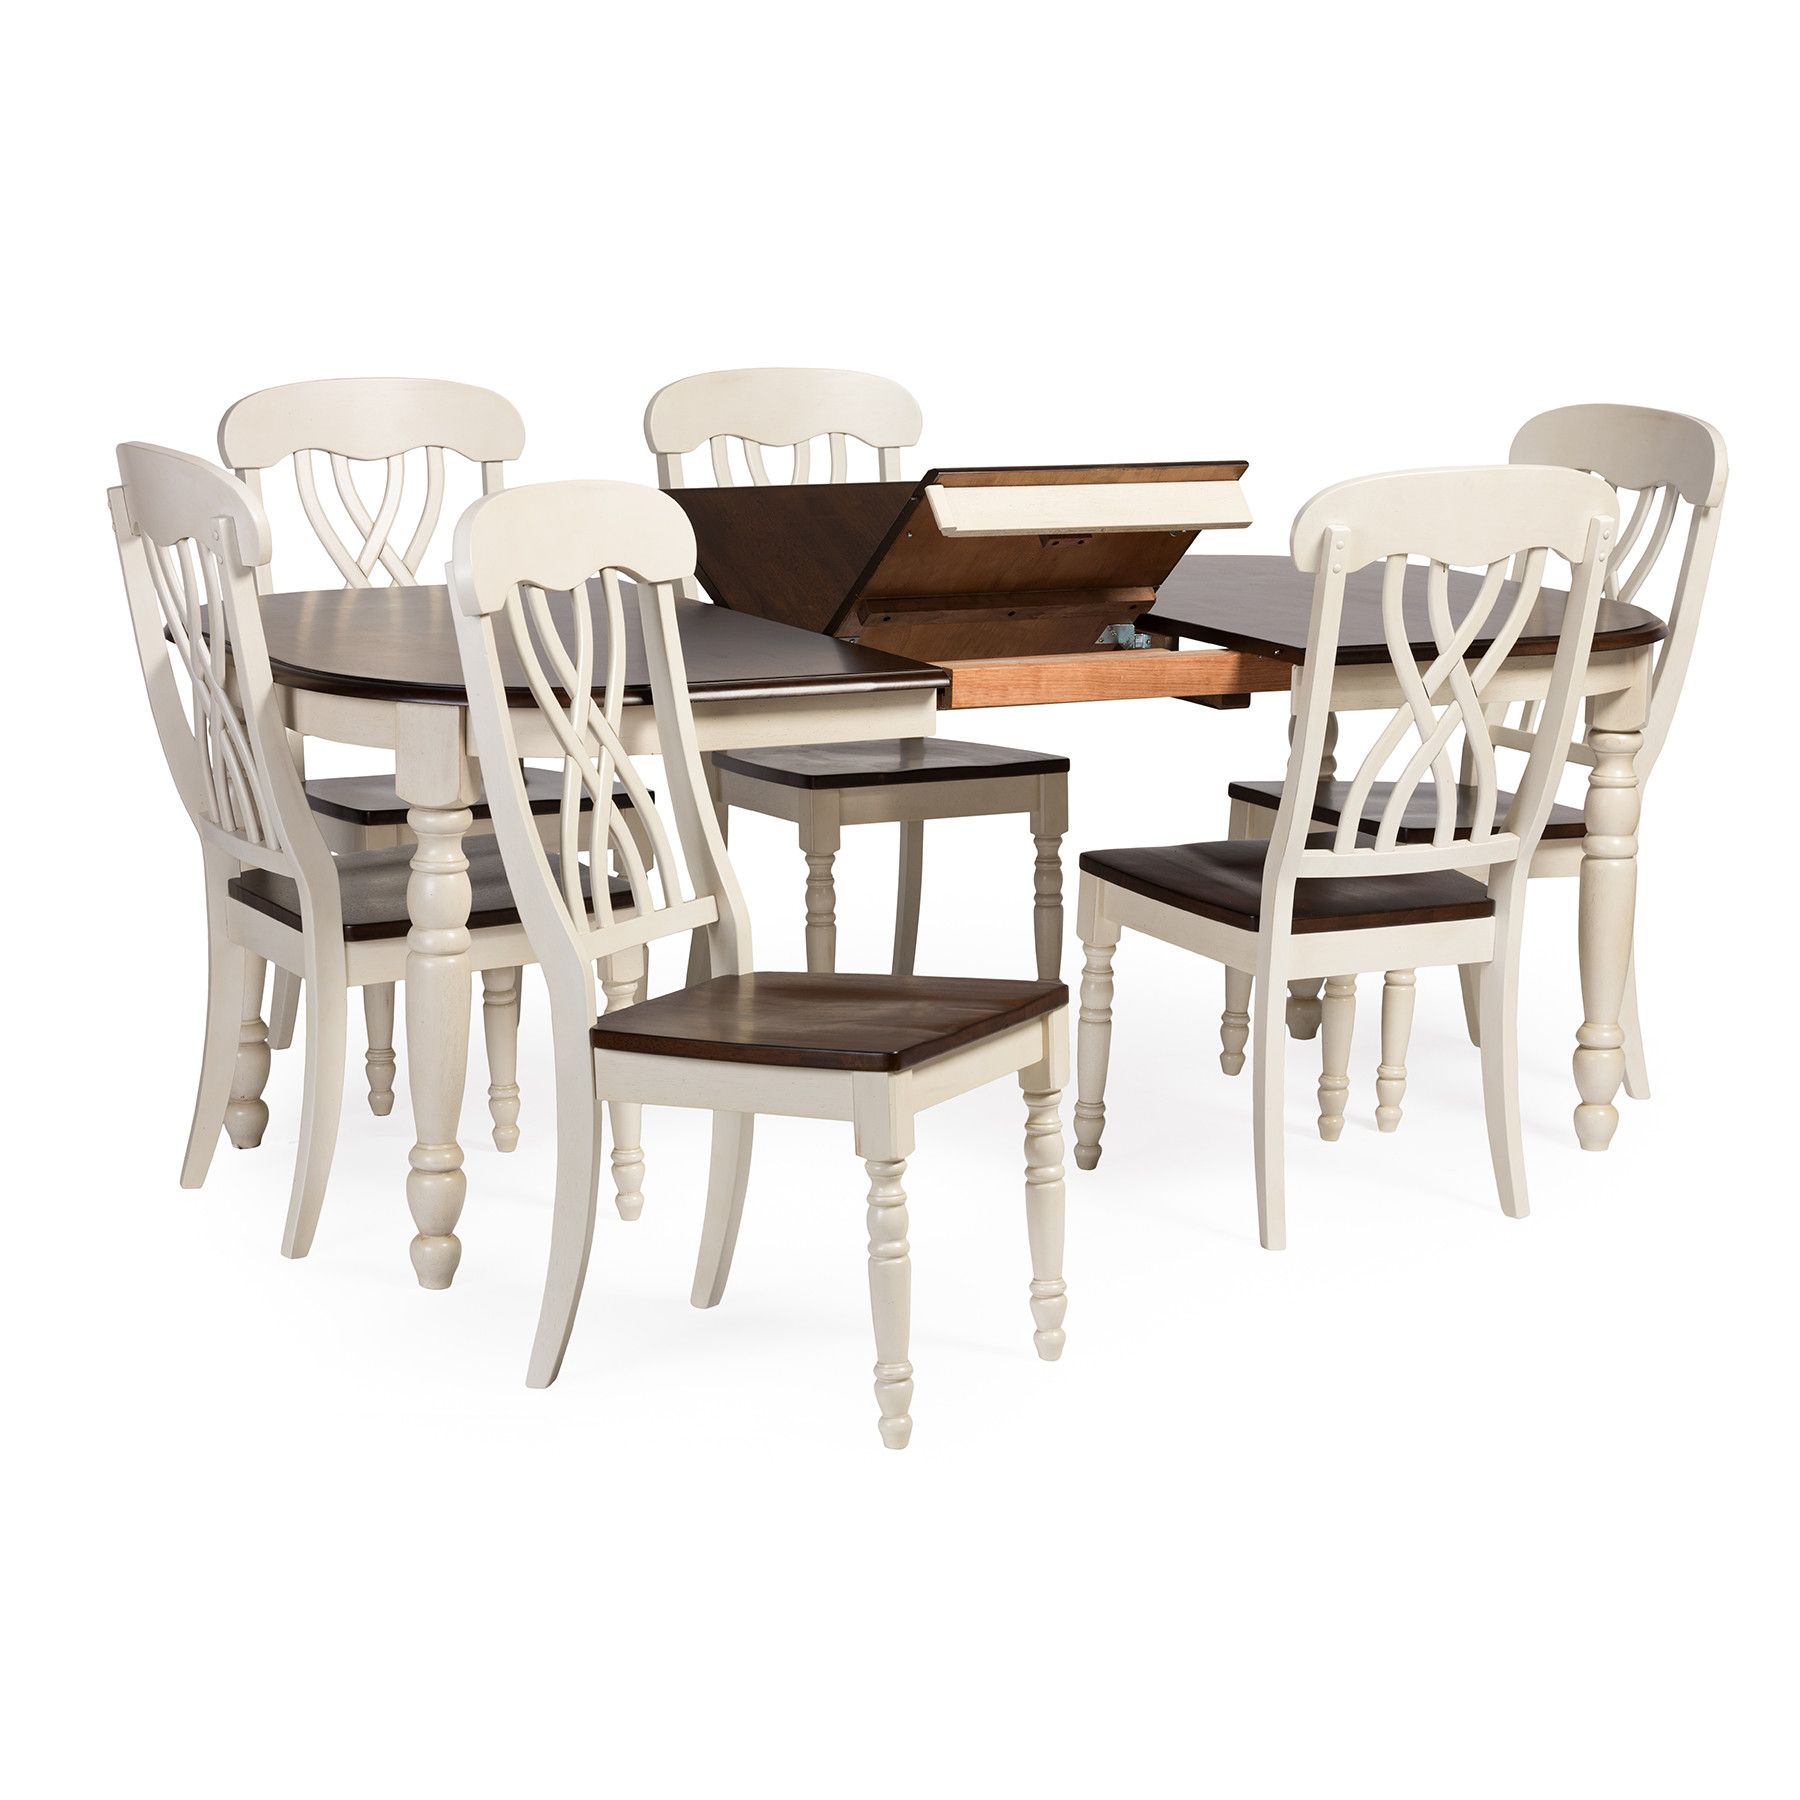 Baxton Studio Keitaro 5 Piece Dining Sets For Most Popular Wholesale Dining Sets. Room Pier One (View 15 of 20)